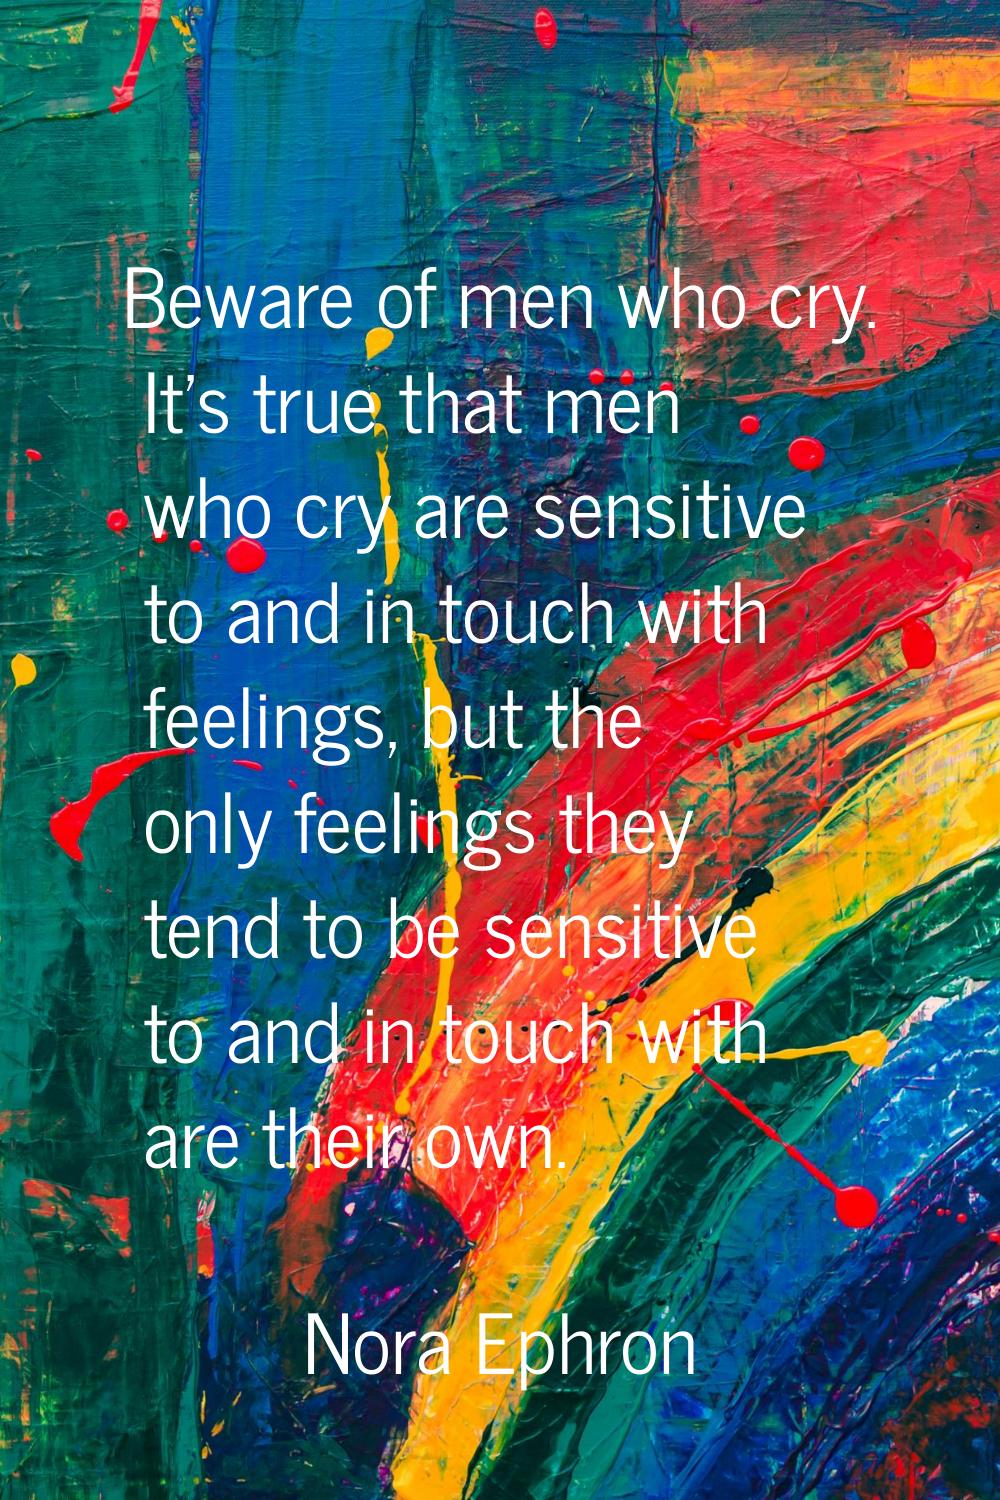 Beware of men who cry. It's true that men who cry are sensitive to and in touch with feelings, but 